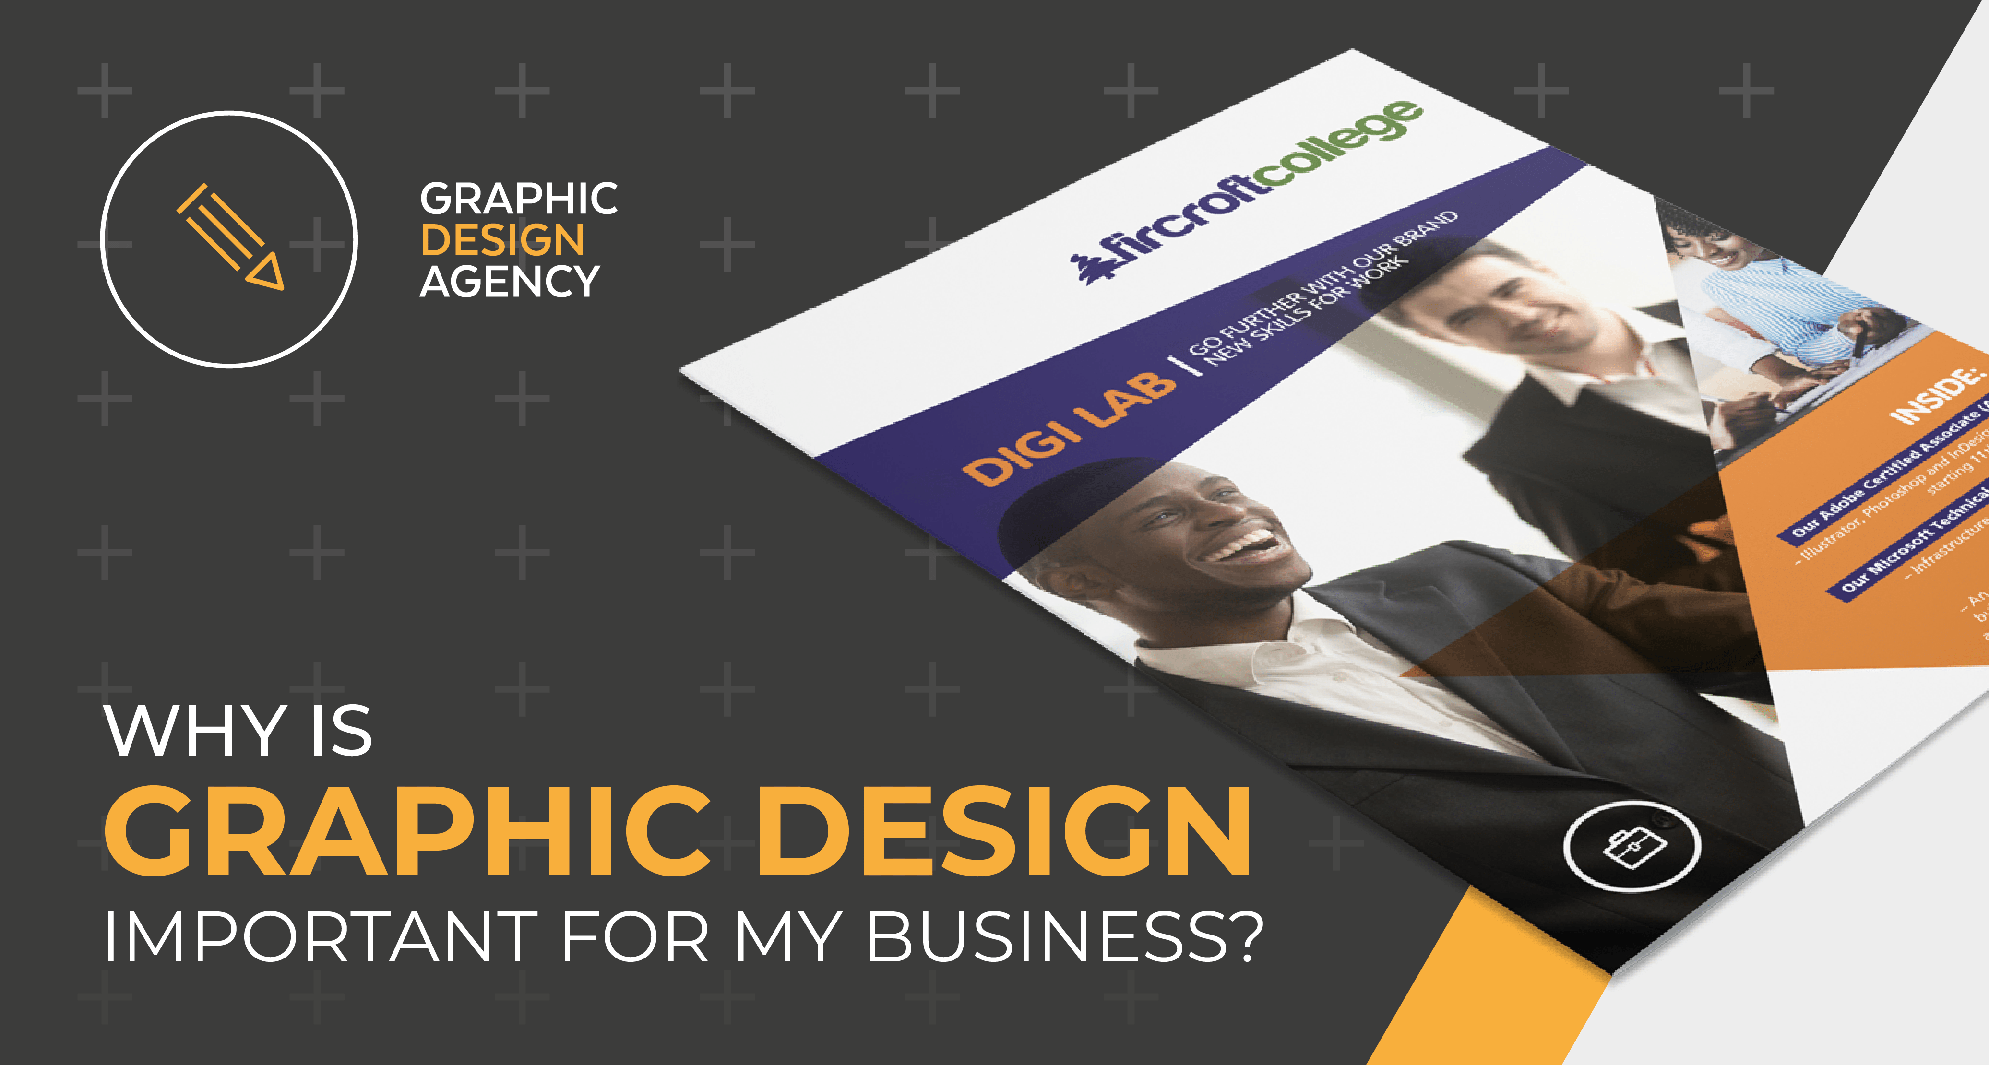 Why is graphic design important for my business? - eighty3 creative